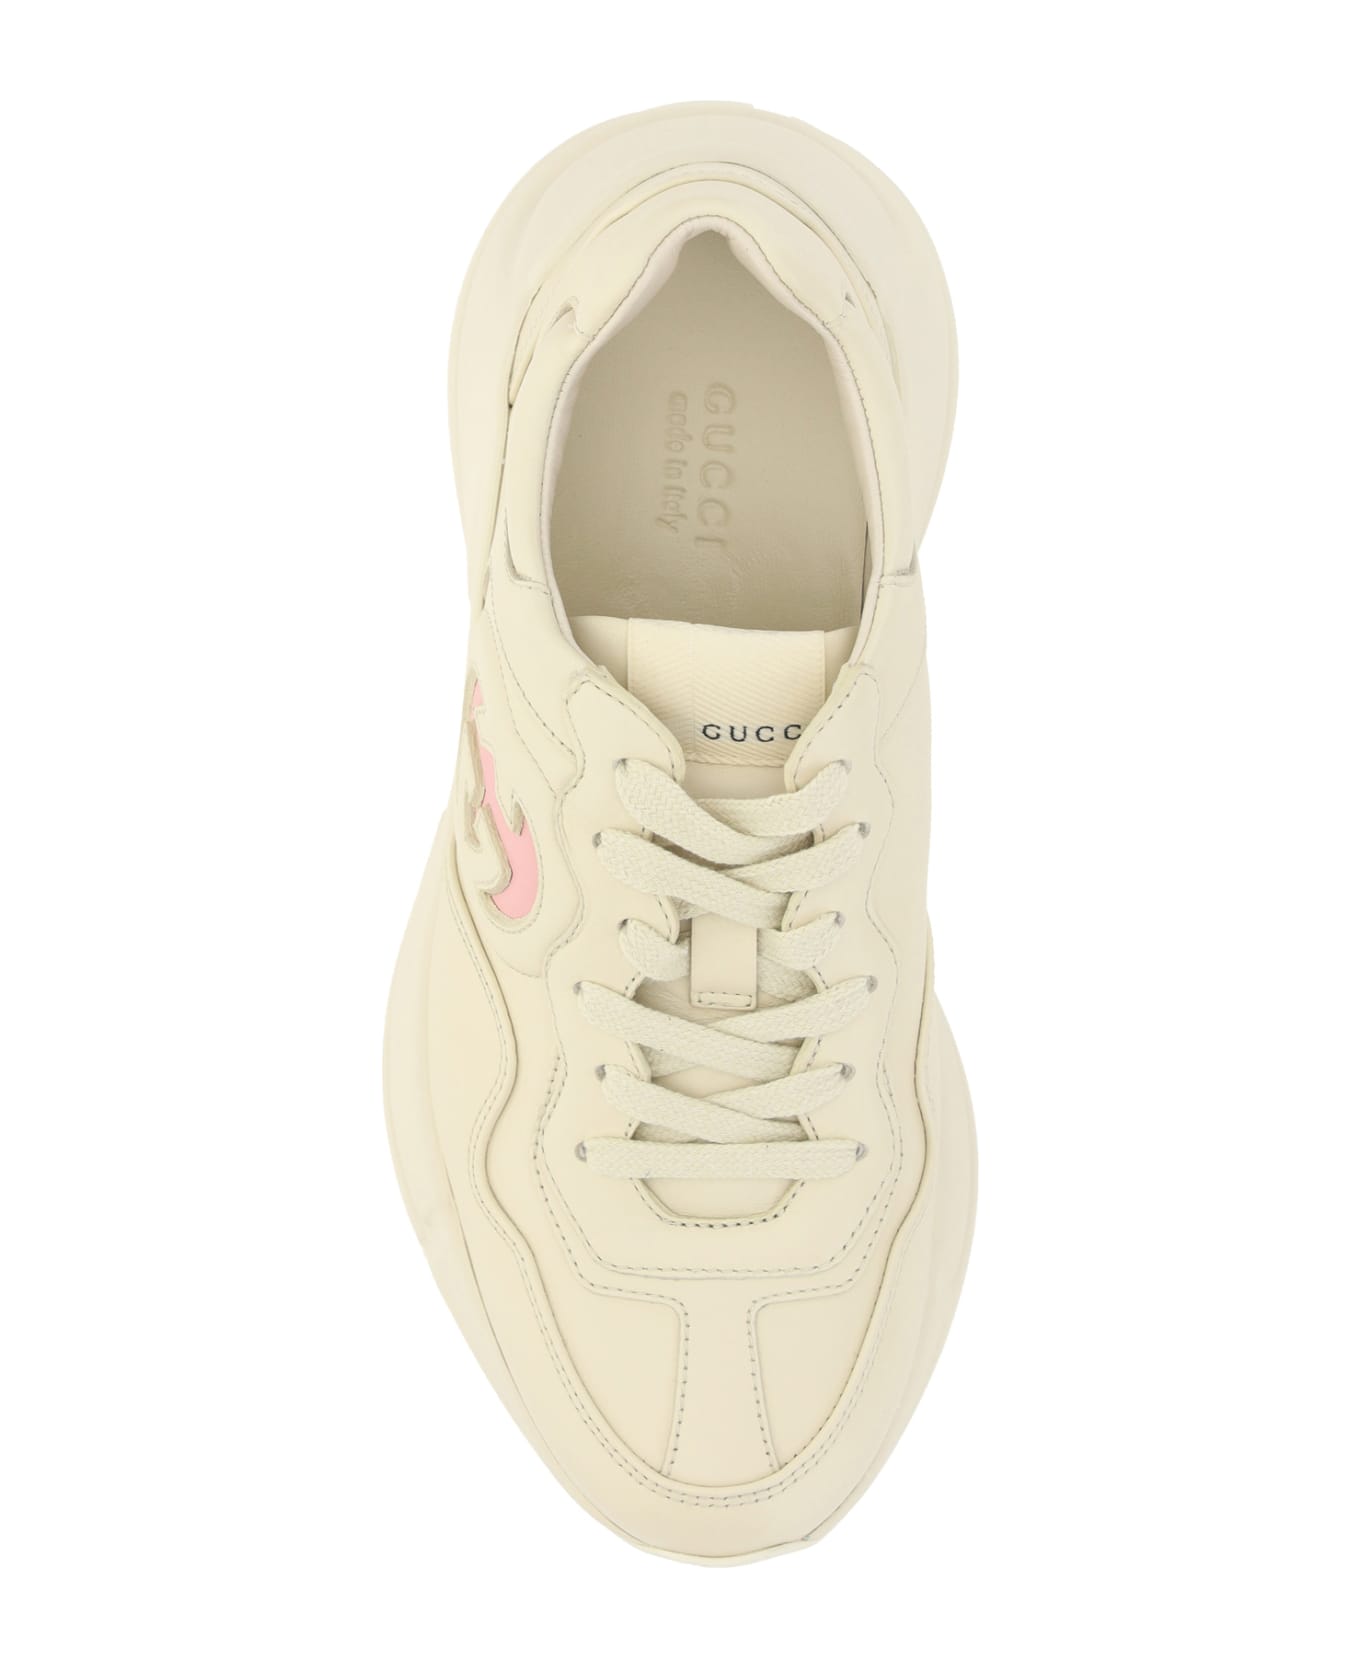 Gucci Sneakers - Ivoire/rose